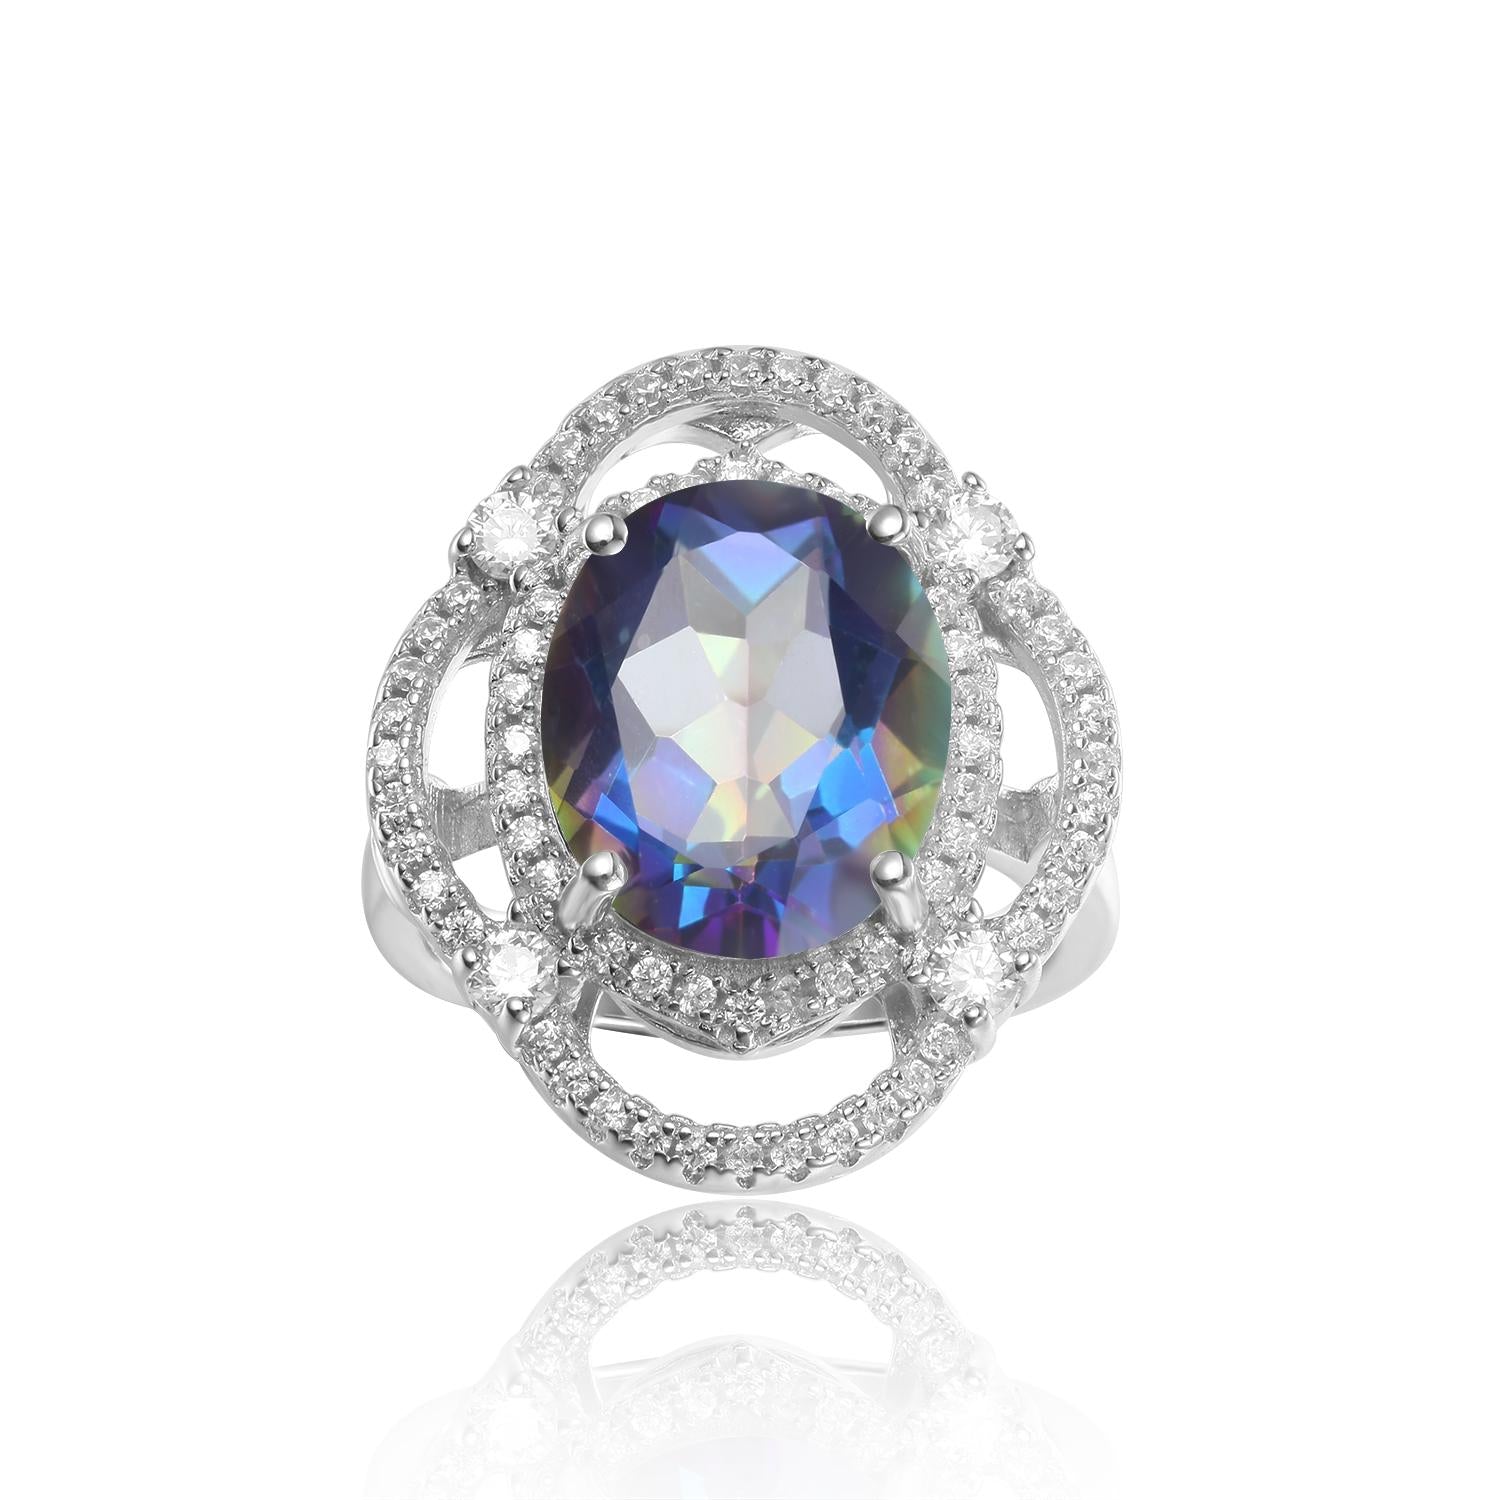 GEM&#39;S BALLET 925 Sterling Silver Birthstone Rings10x12mm Oval Rainbow Mystic Topaz Antique Cocktail Ring For Women Fine Jewelry Blueish|925 Sterling Silver